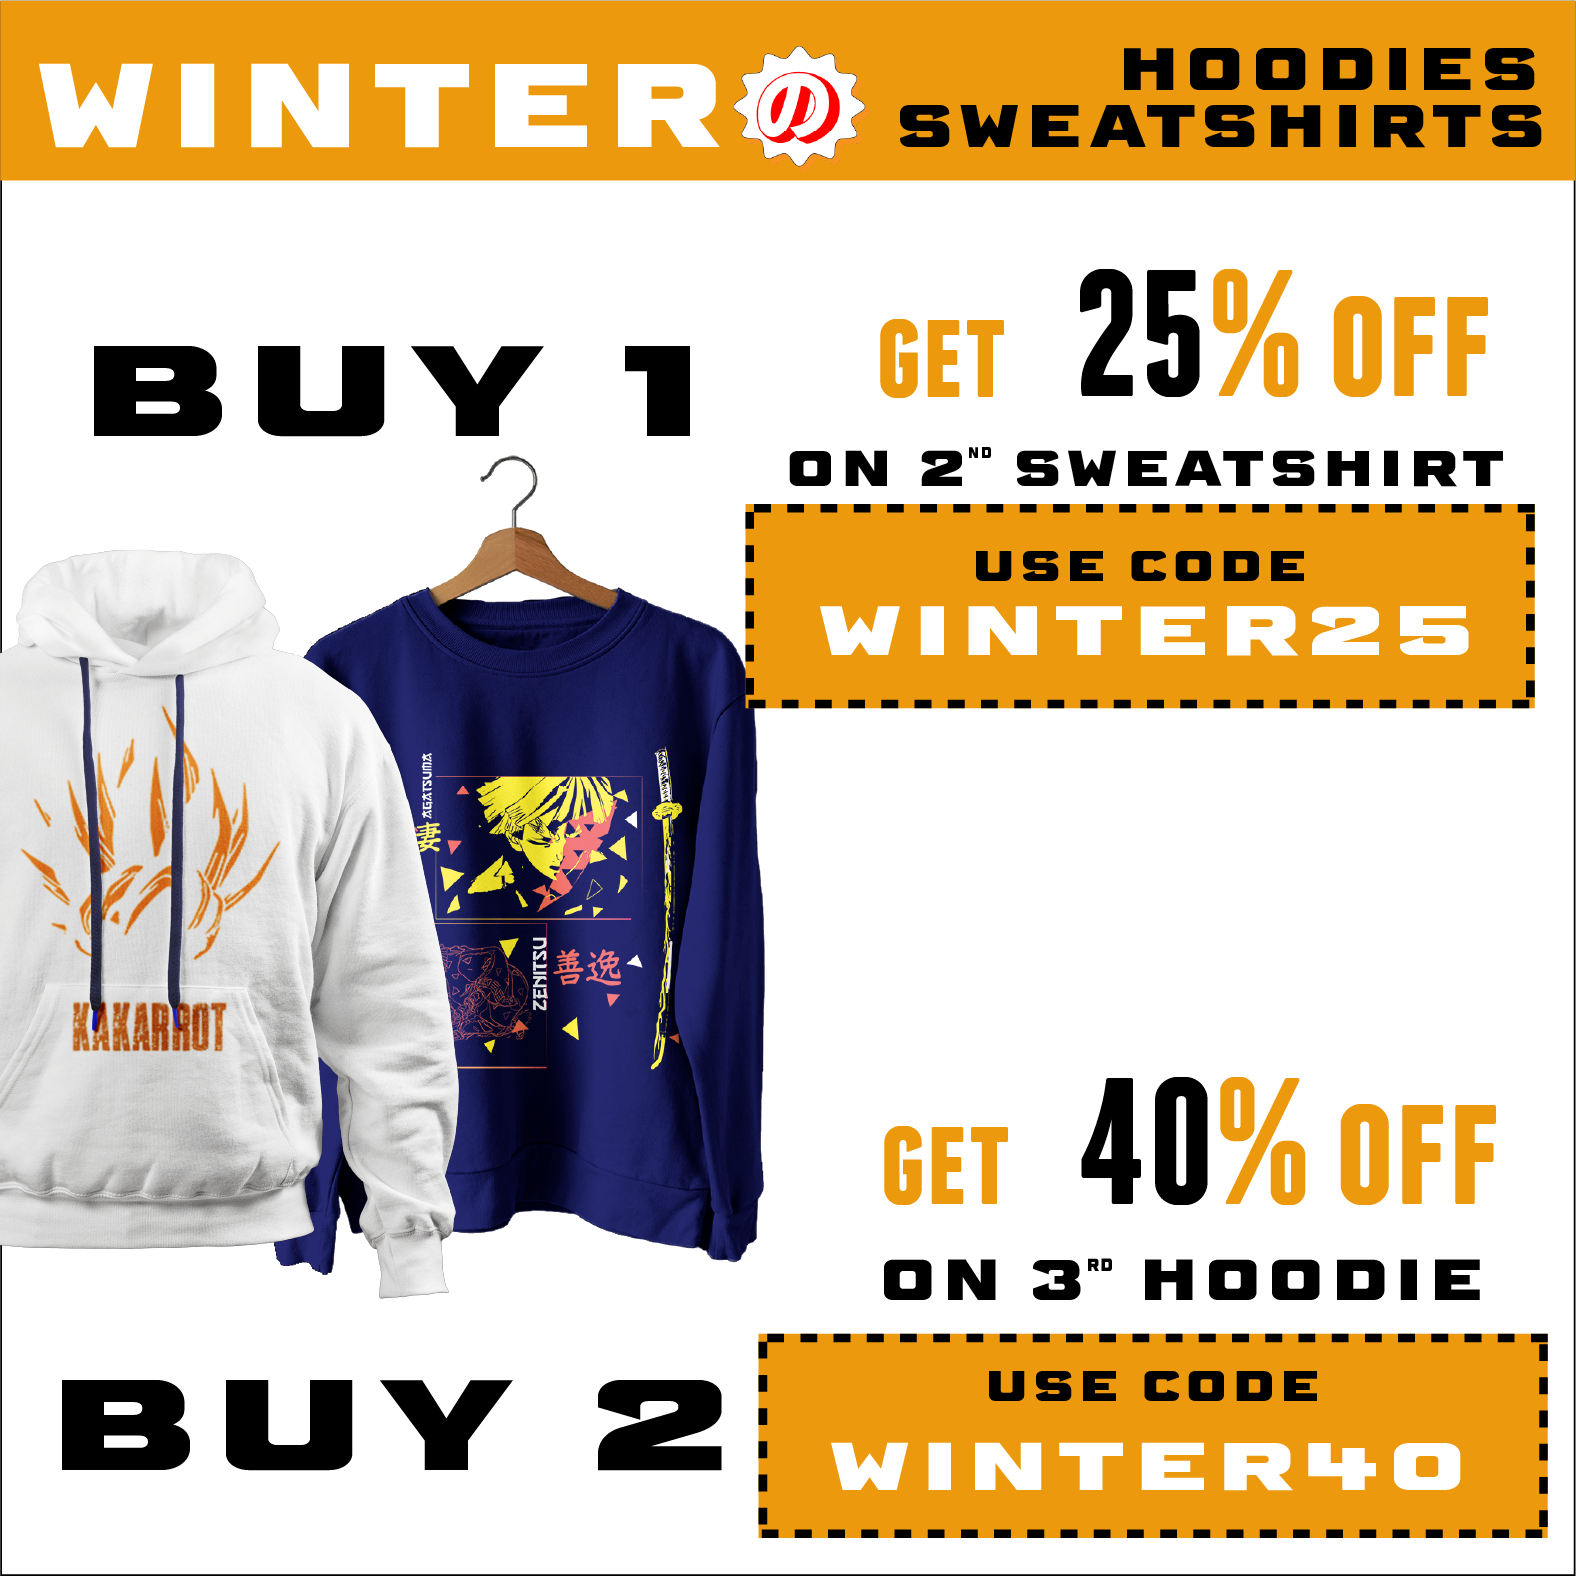 Shop Anime Hoodies with Great Offers from the Winter Anime Collection